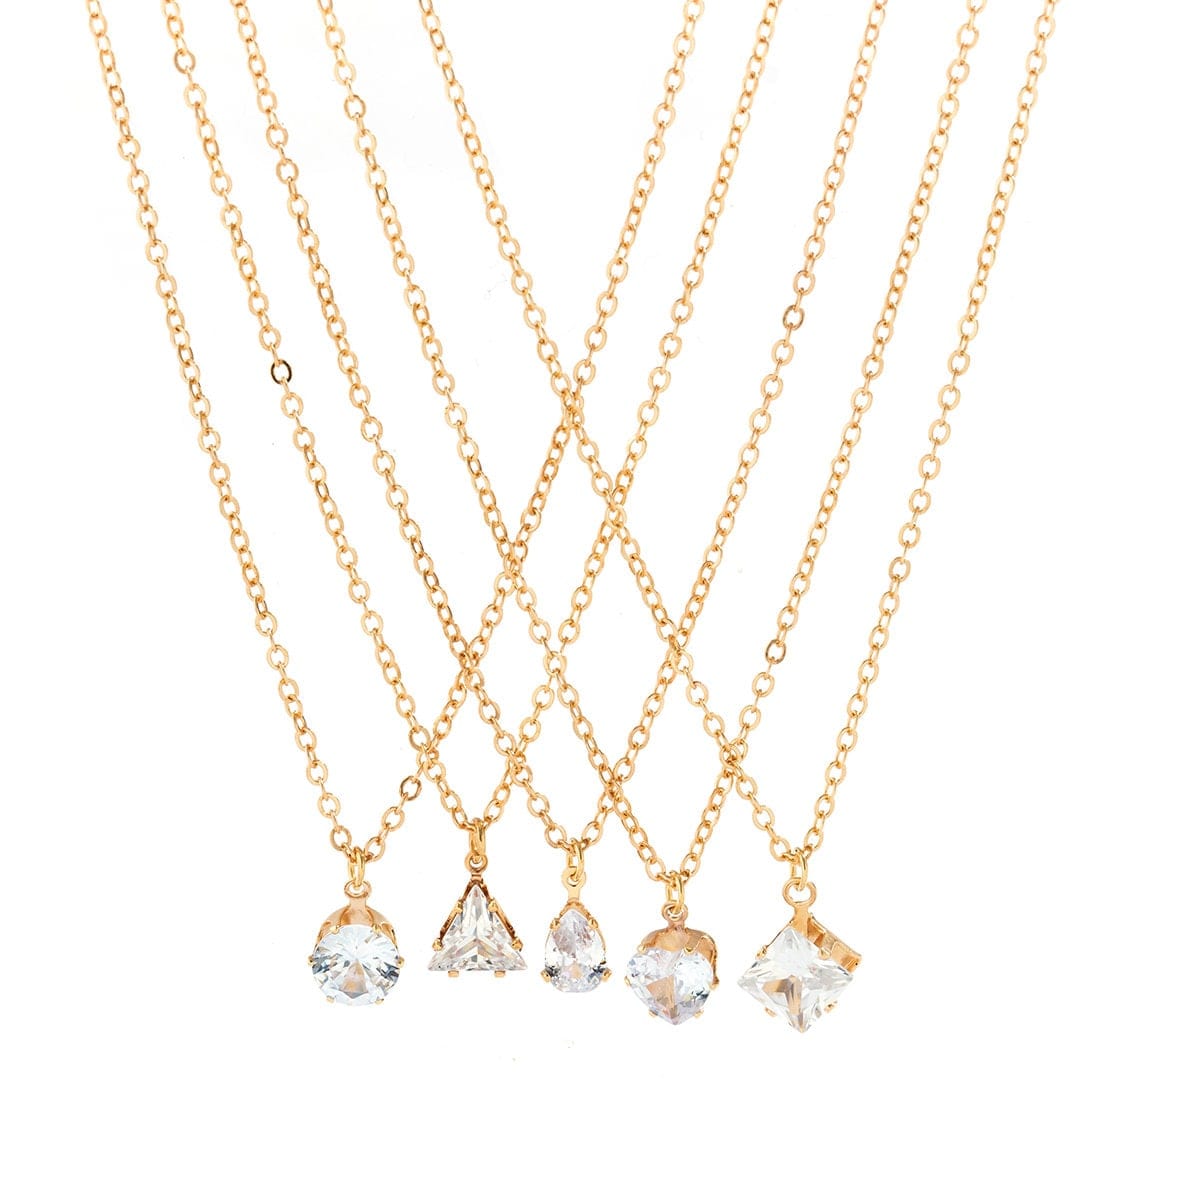 Trendy Layered Geometric Crystal Pendant Cable Chain Necklace Set